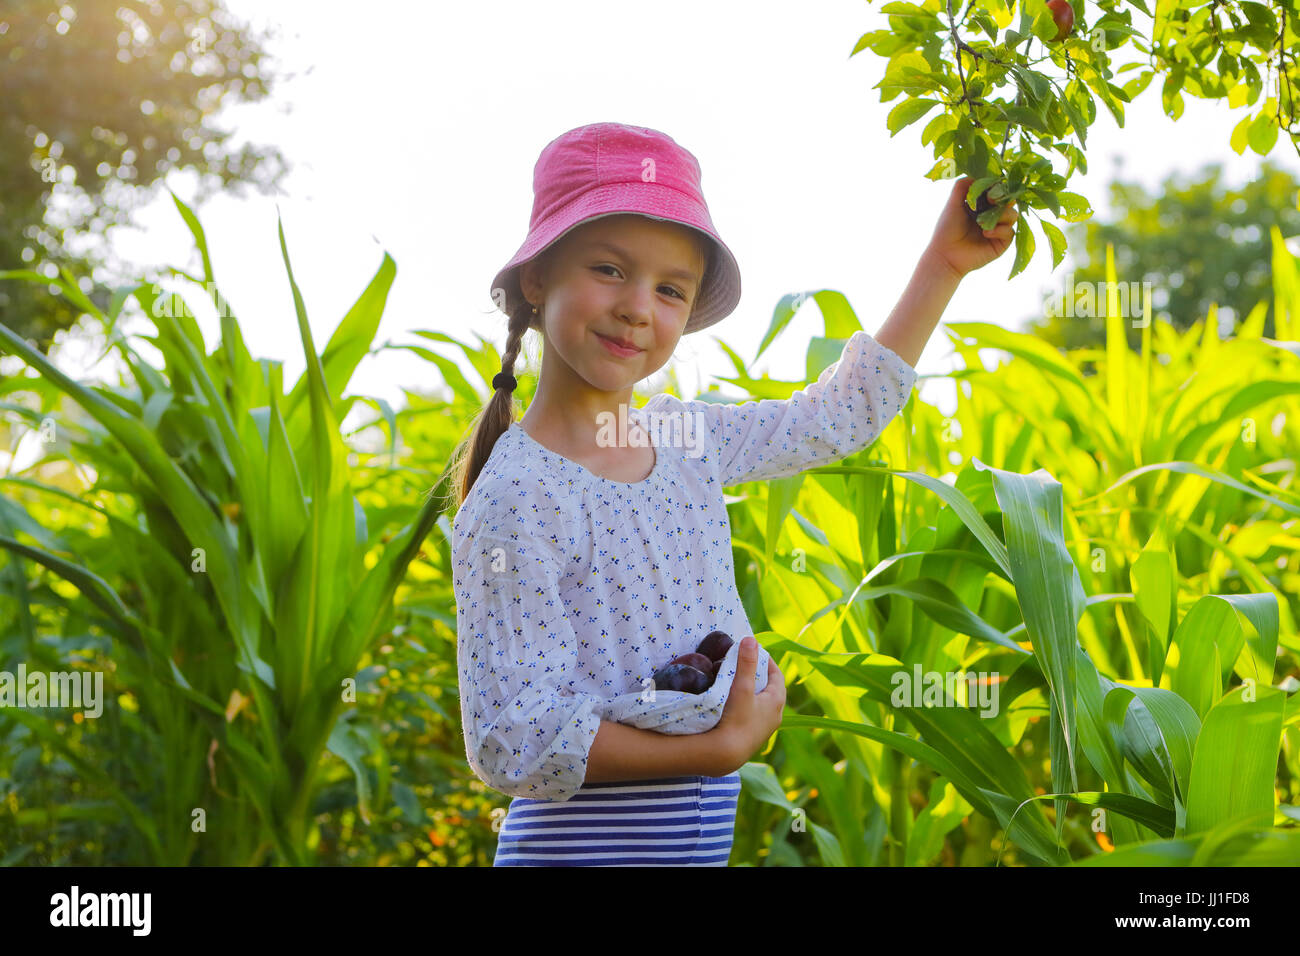 Little girl picking up plums in a garden Stock Photo